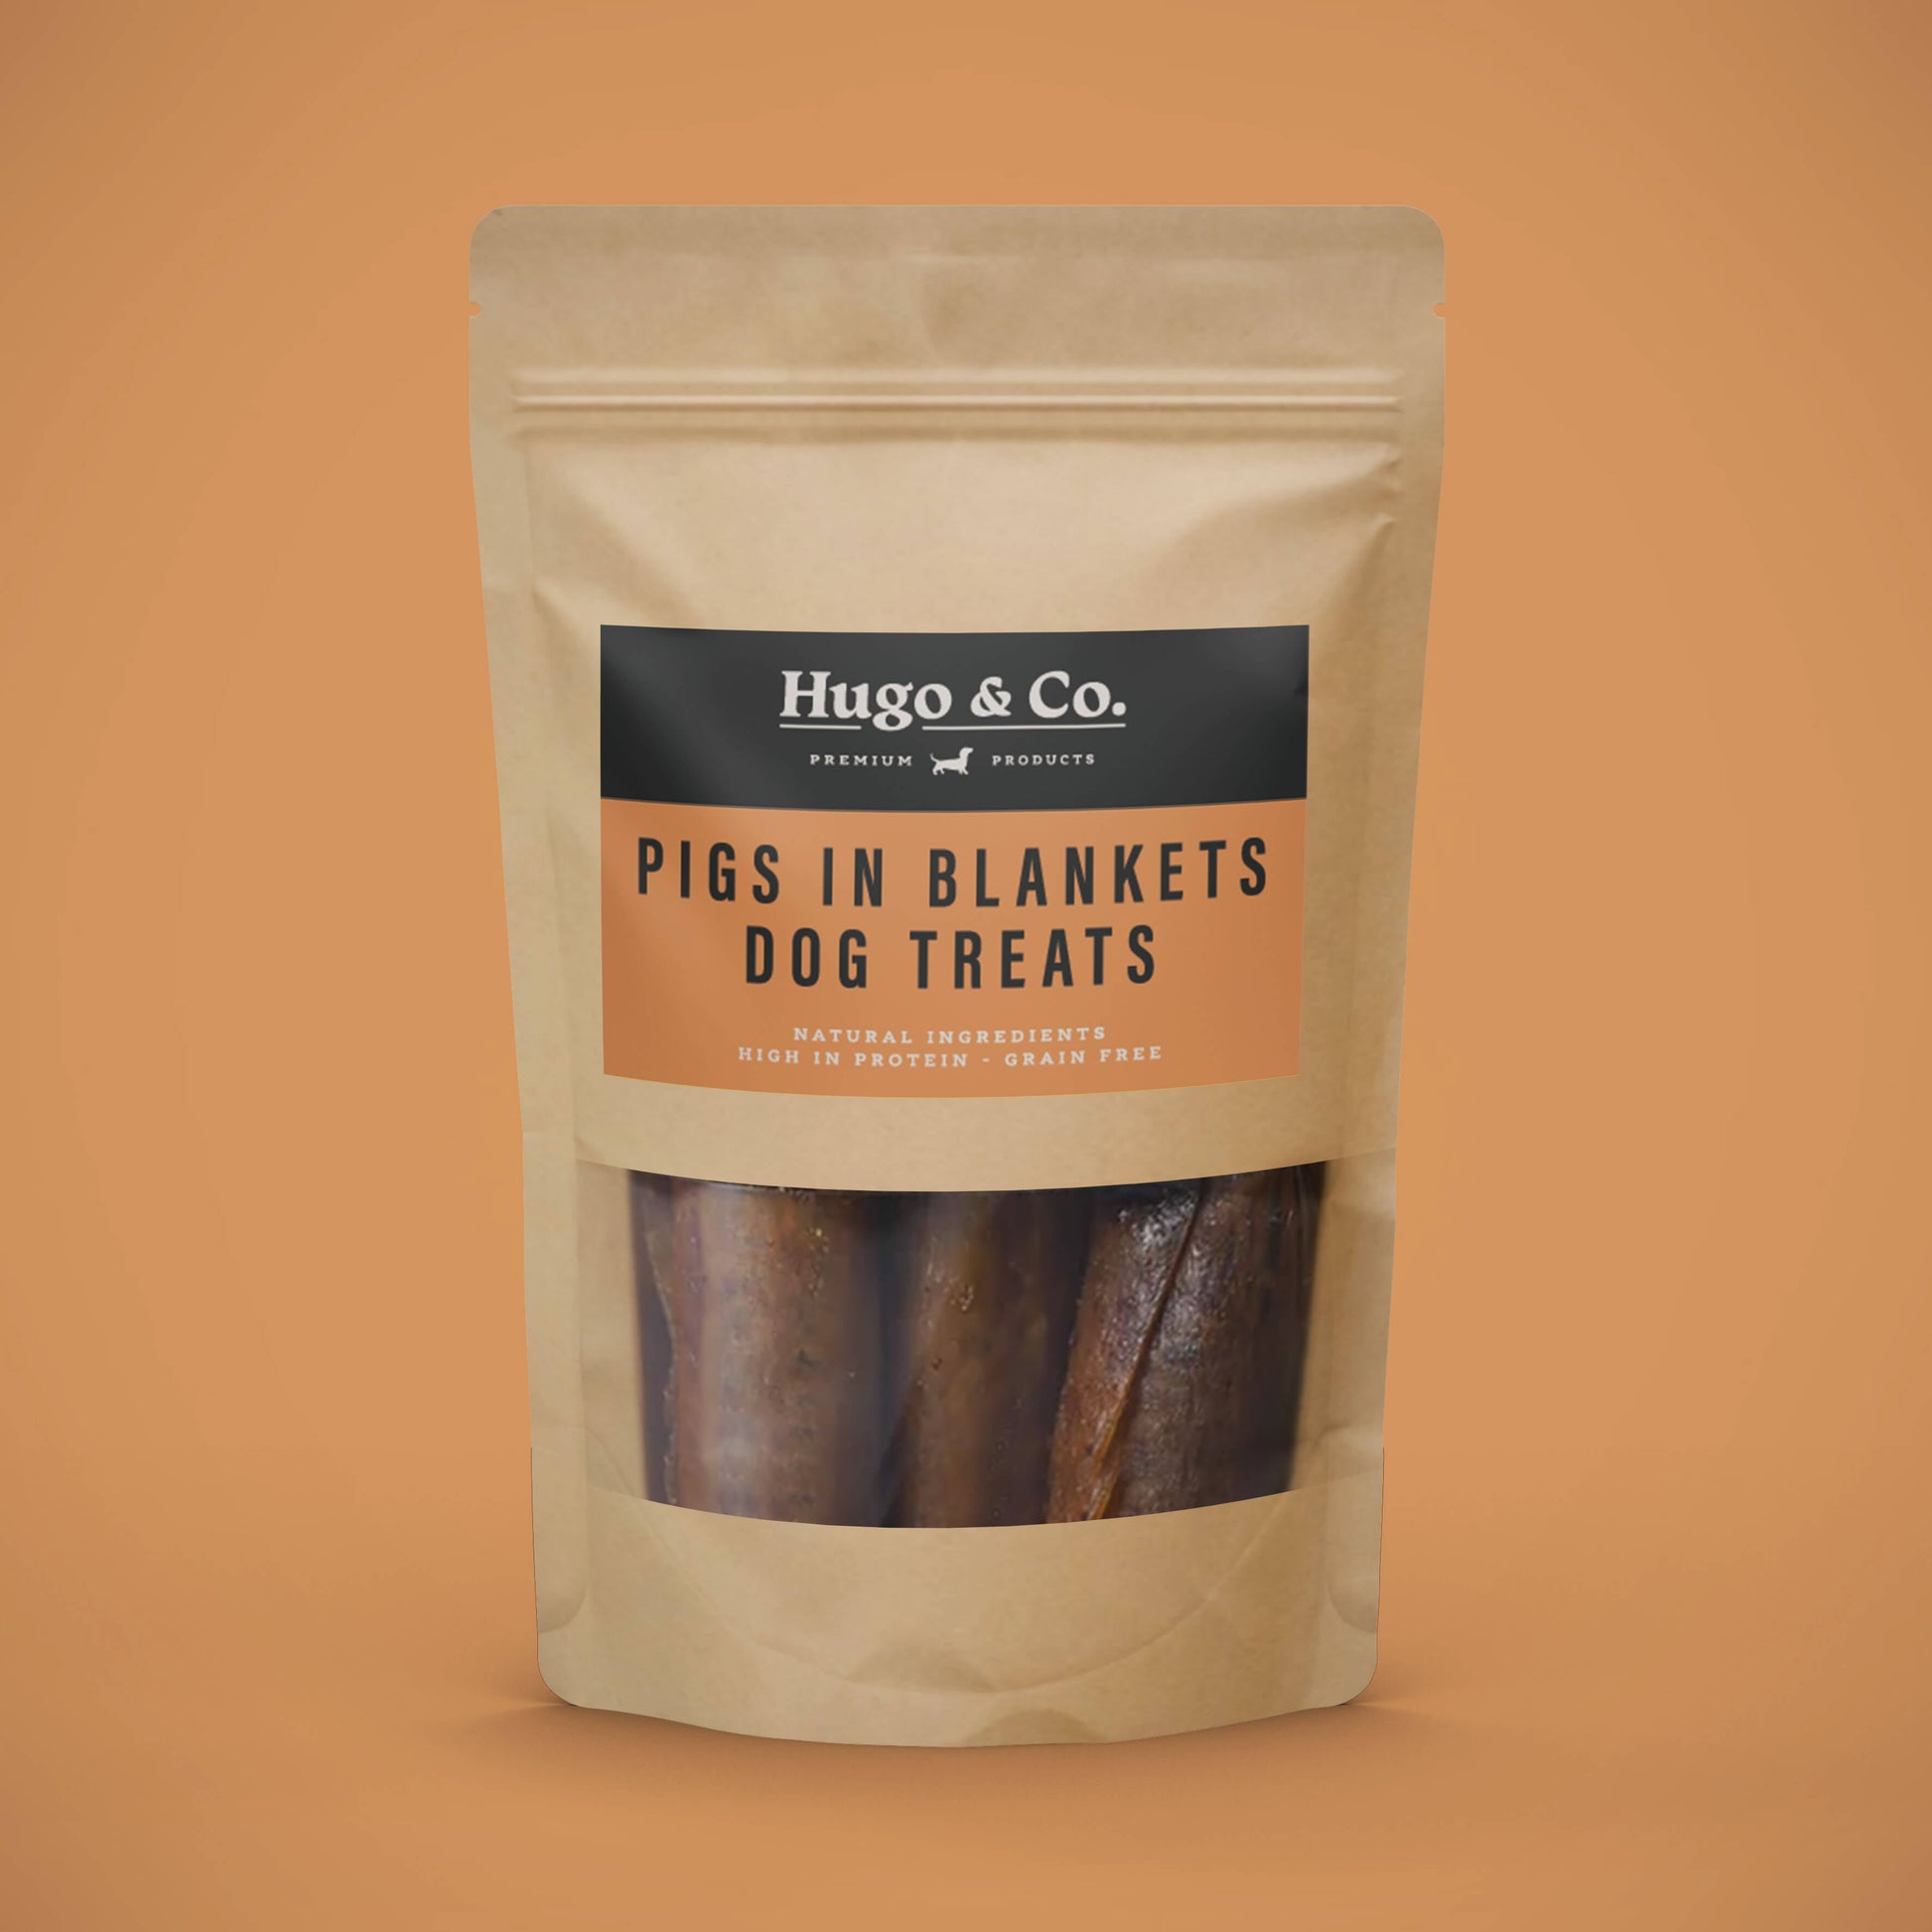 Pigs in Blankets Dog Treats - 80g - The Cambridge Dog Co.